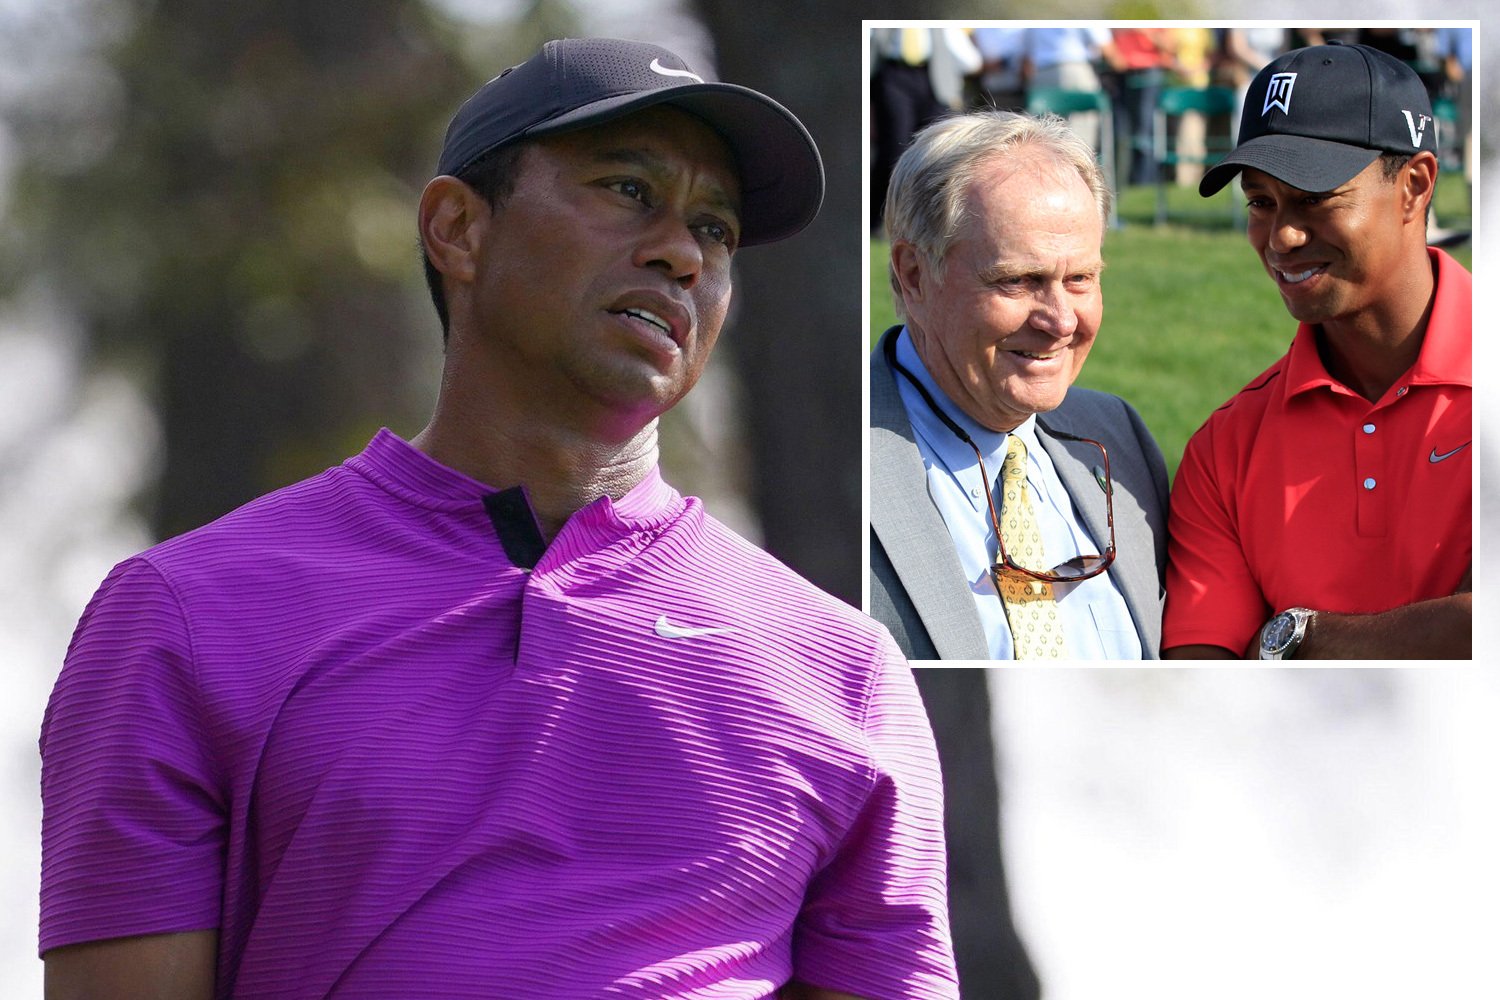 Tiger Woods' Masters defence fizzles away after spooky Jack Nicklaus comparison